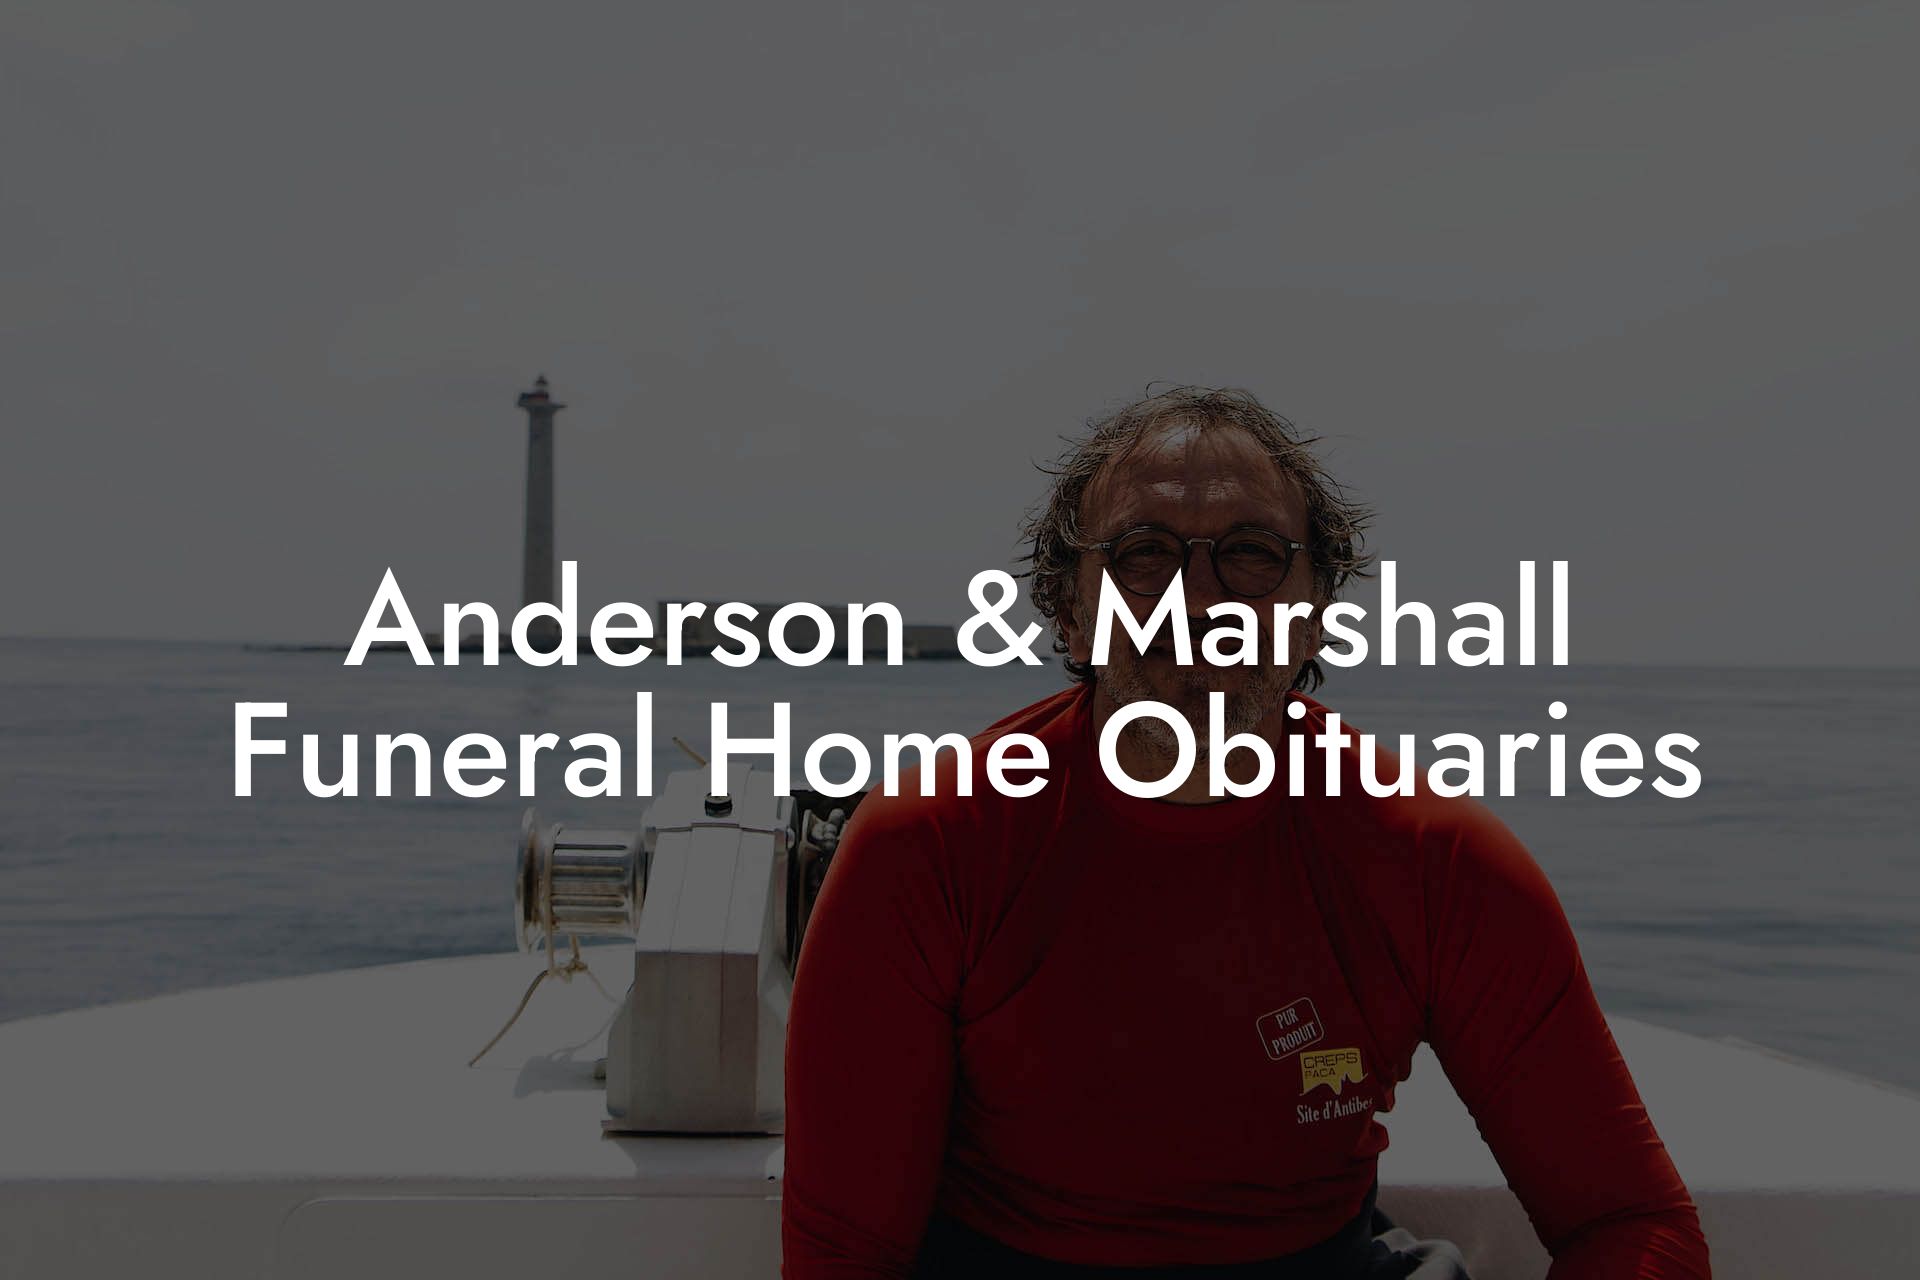 Anderson & Marshall Funeral Home Obituaries